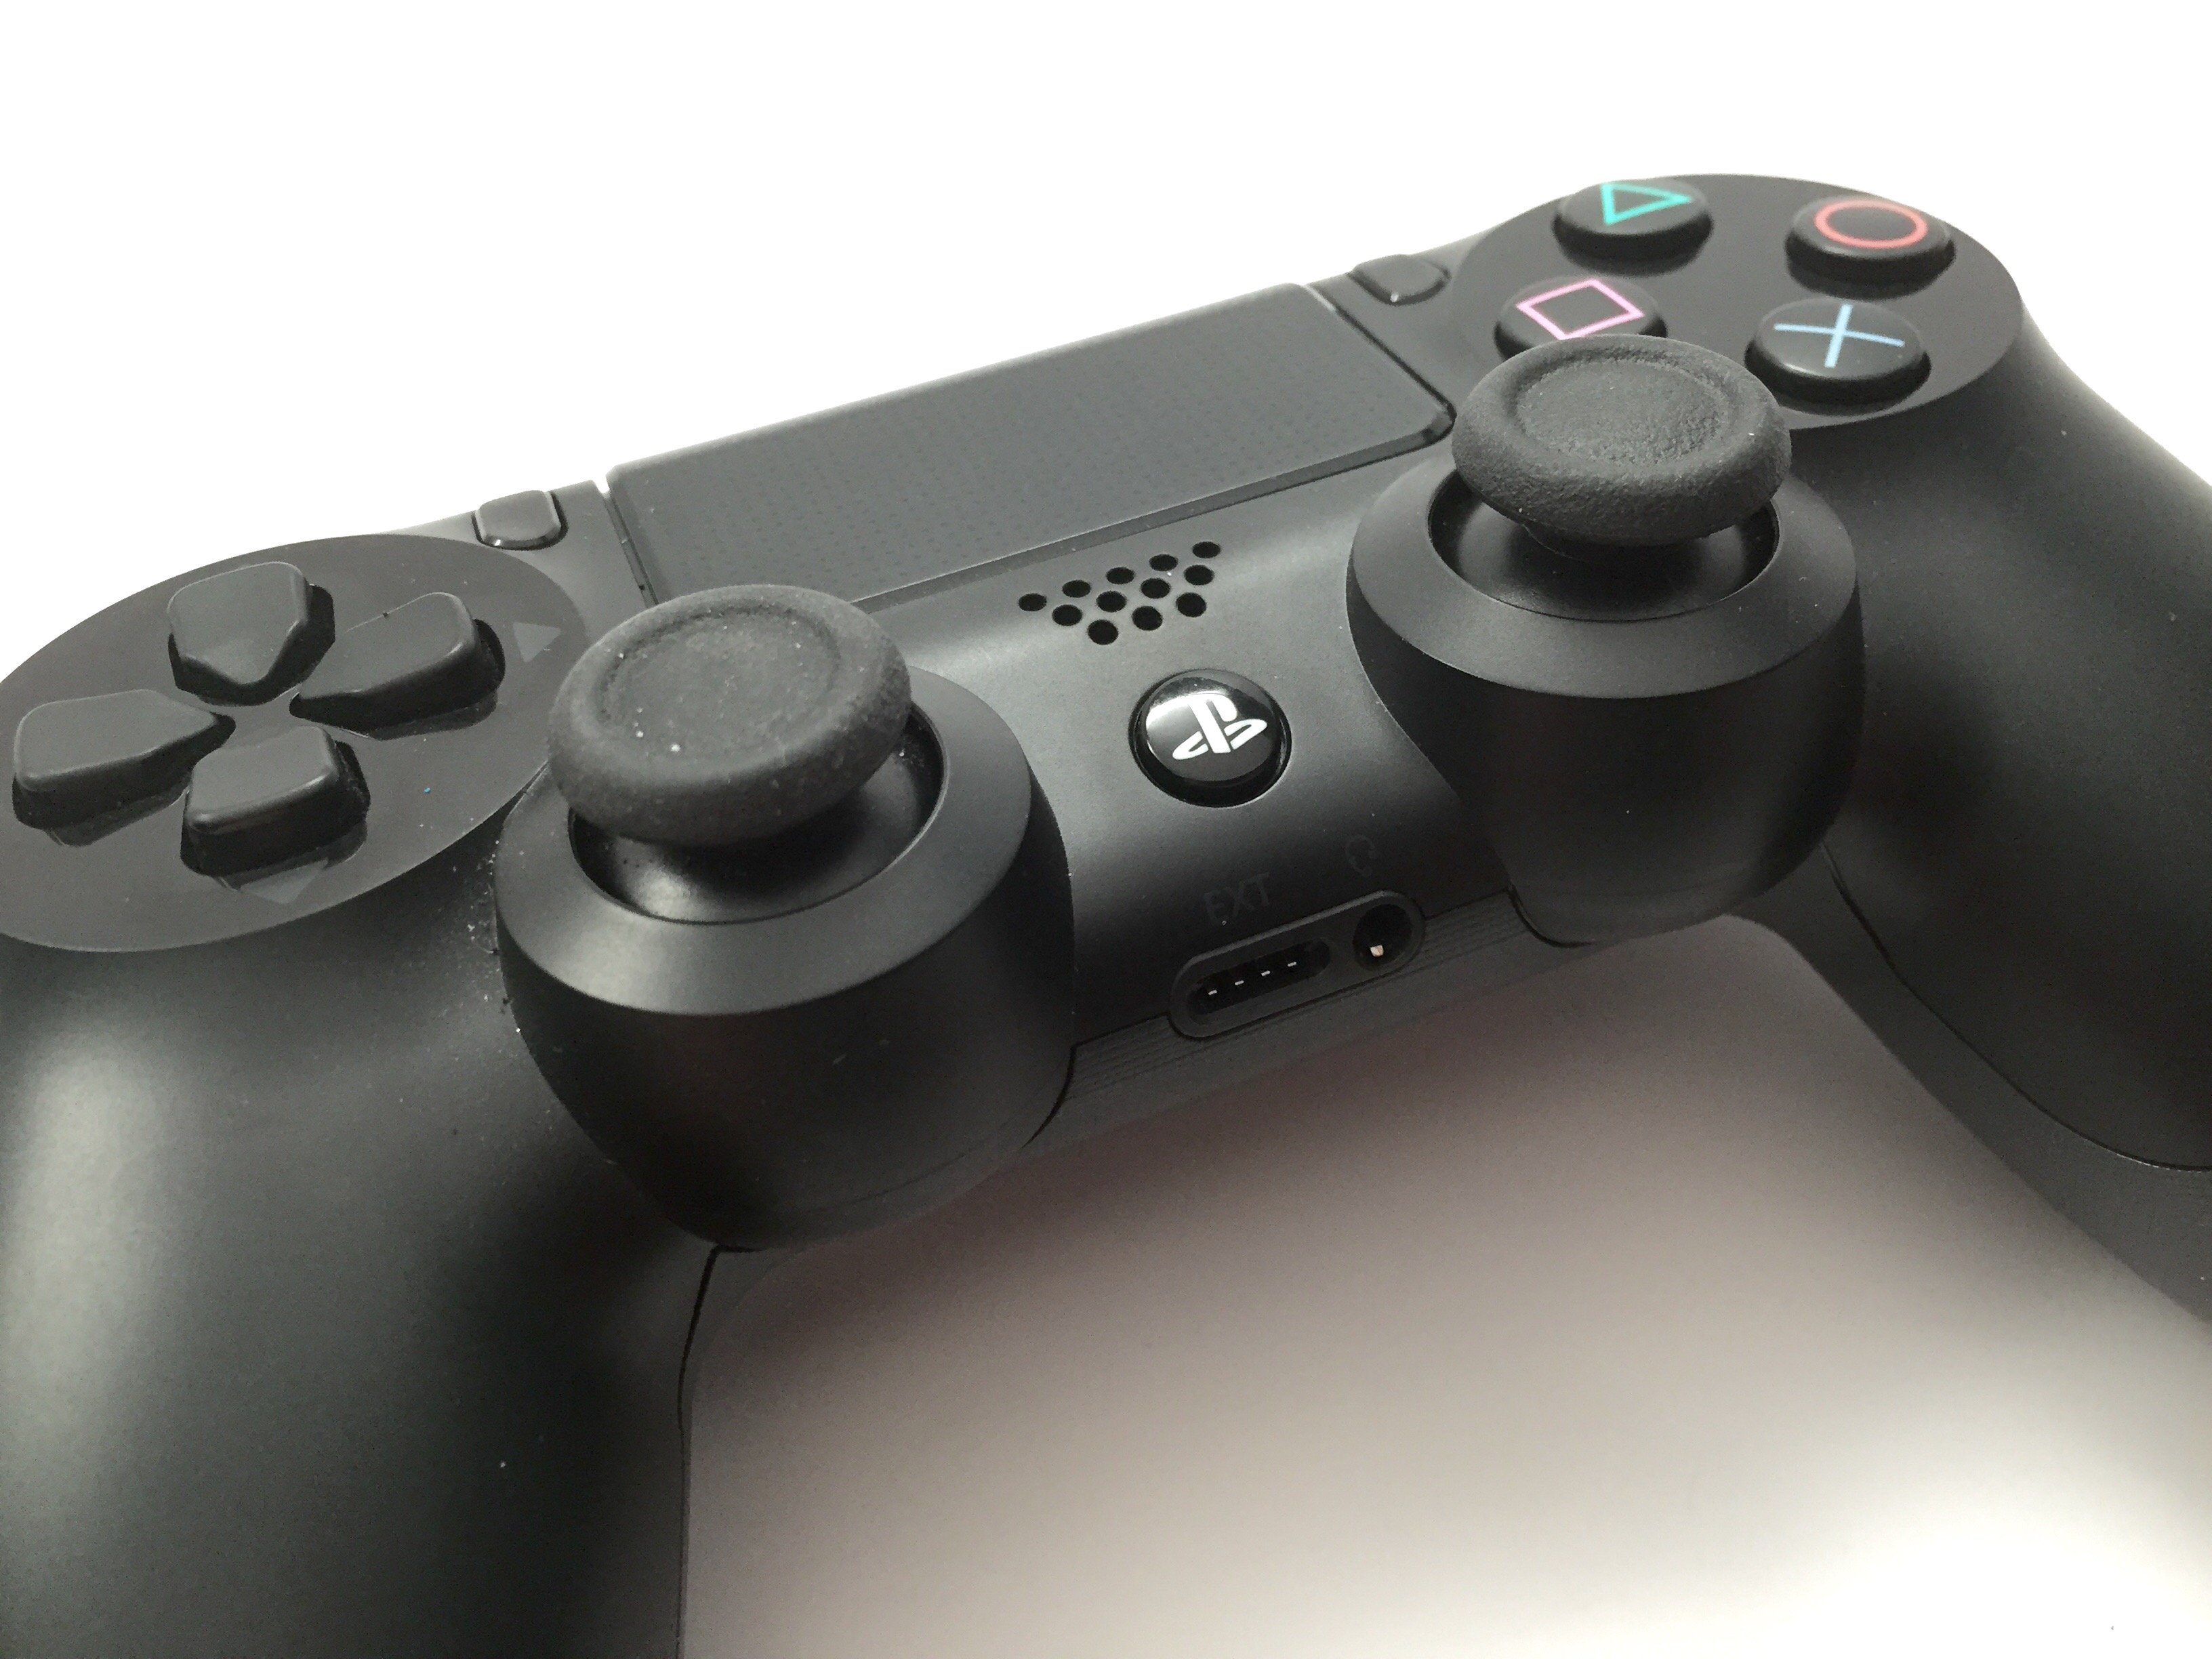 Double press the home button to quickly switch apps on the PS4.